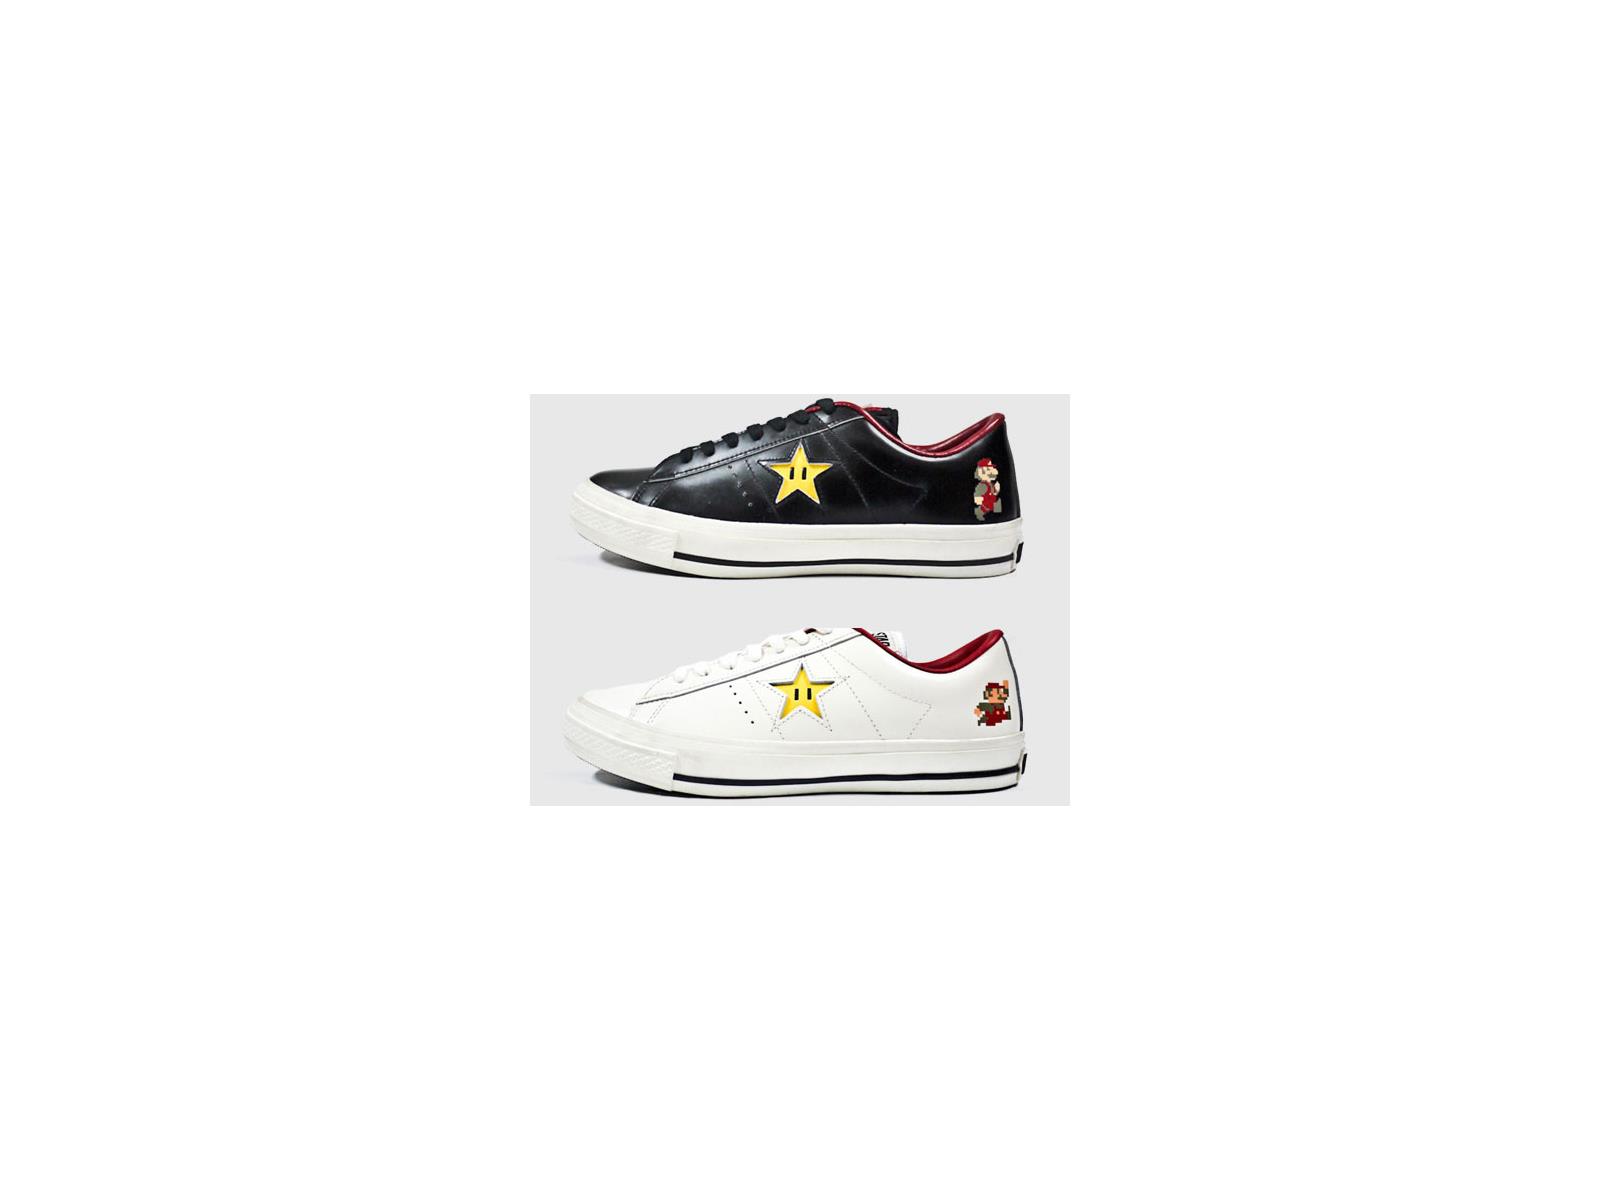 Mario Converse Sneaks Might Be the Coolest Kicks Ever